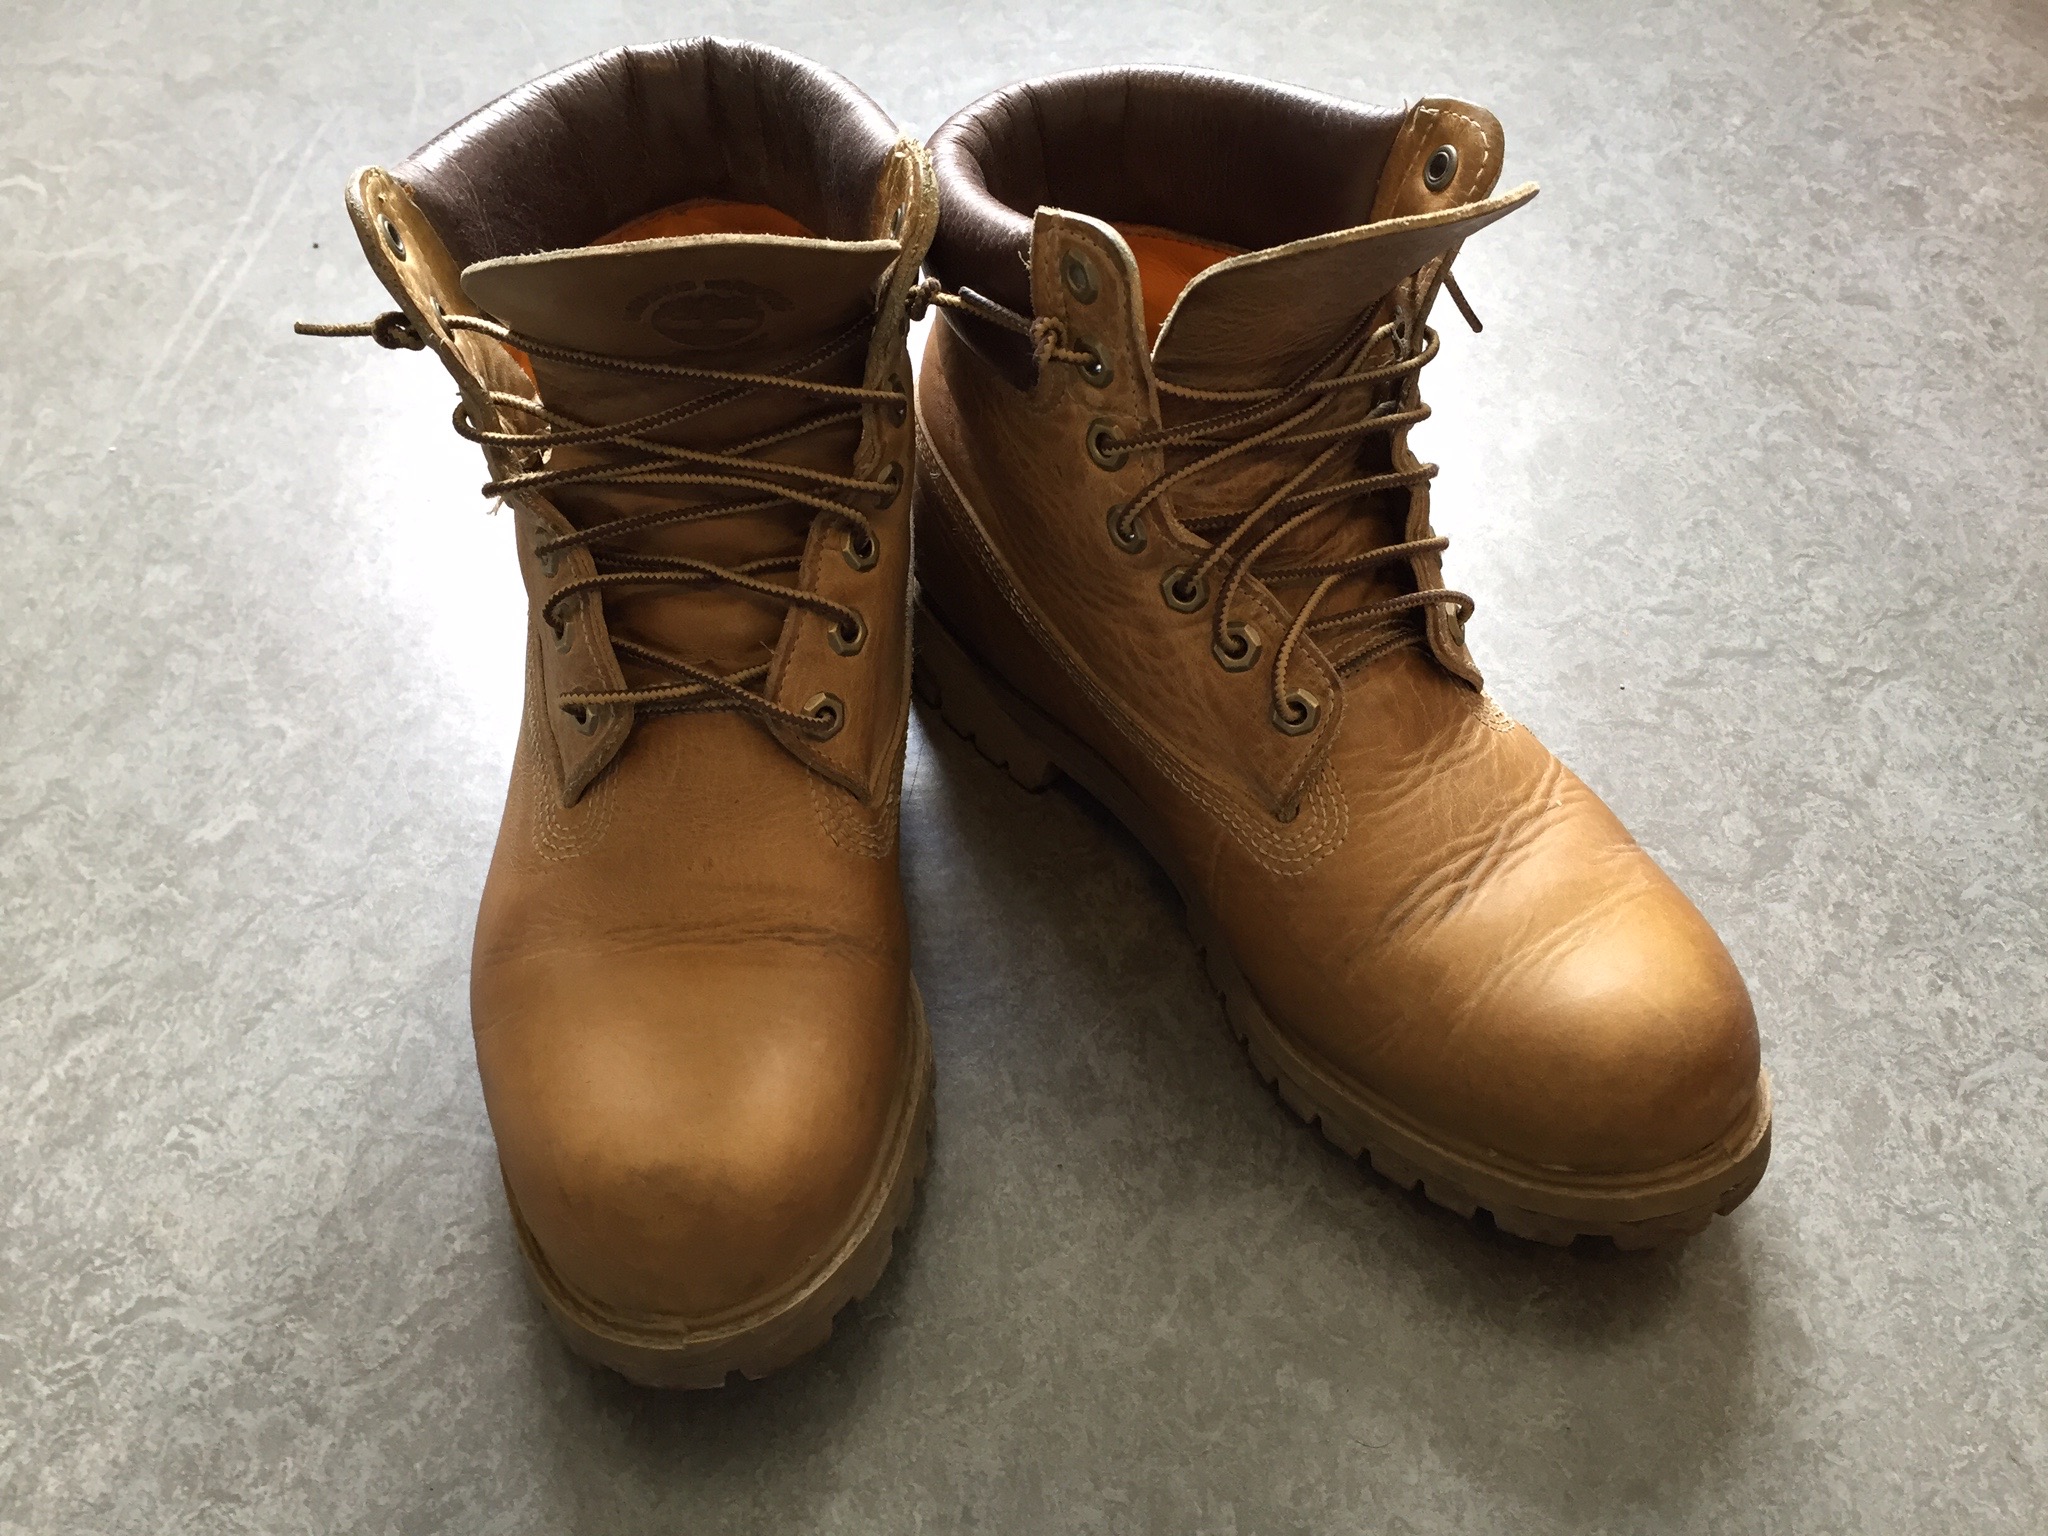 shoe polish for timberland boots